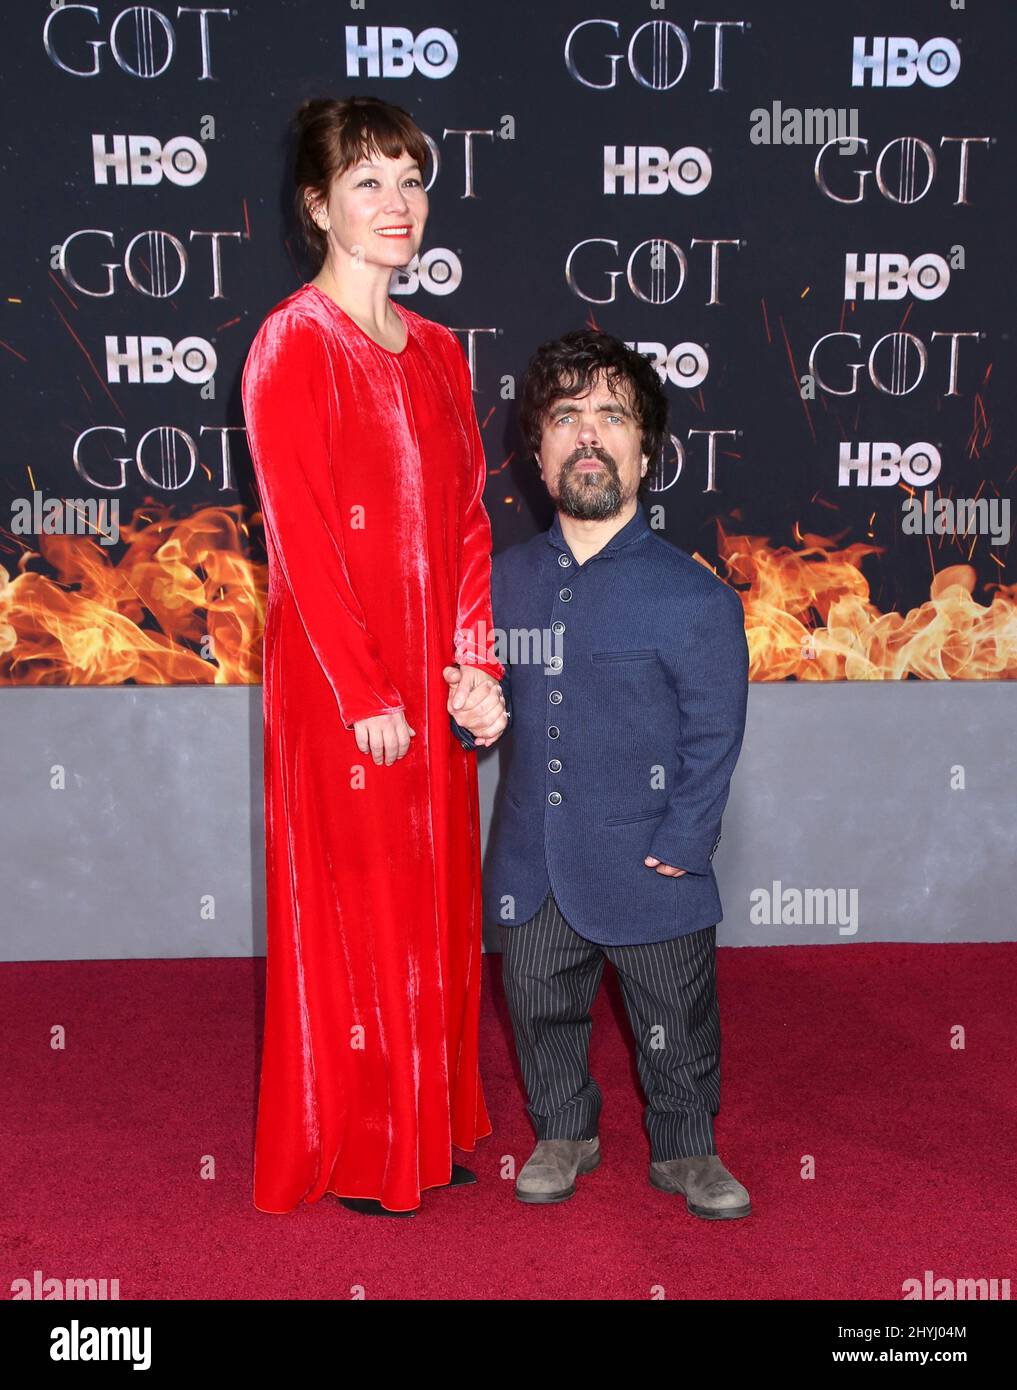 Peter Dinklage and wife Erica Schmidt attending the 'Game of Thrones' Final Season World Premiere held at Radio City Music Hall on April 3, 2019 in New York City. Stock Photo